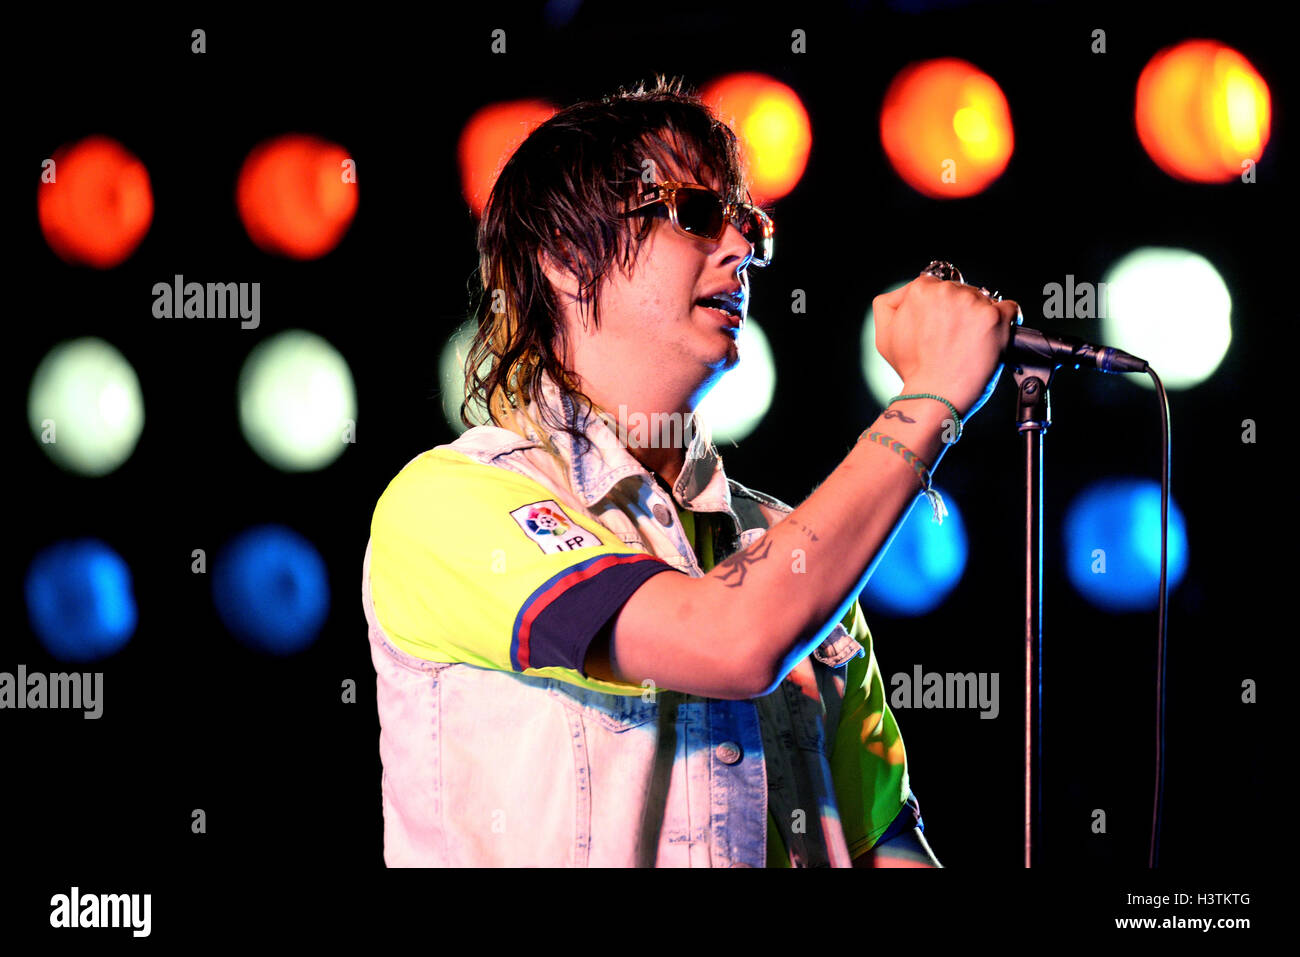 BARCELONA - MAY 30: The Strokes (band) performs at Primavera Sound 2015 Festival, Pitchfork stage. Stock Photo